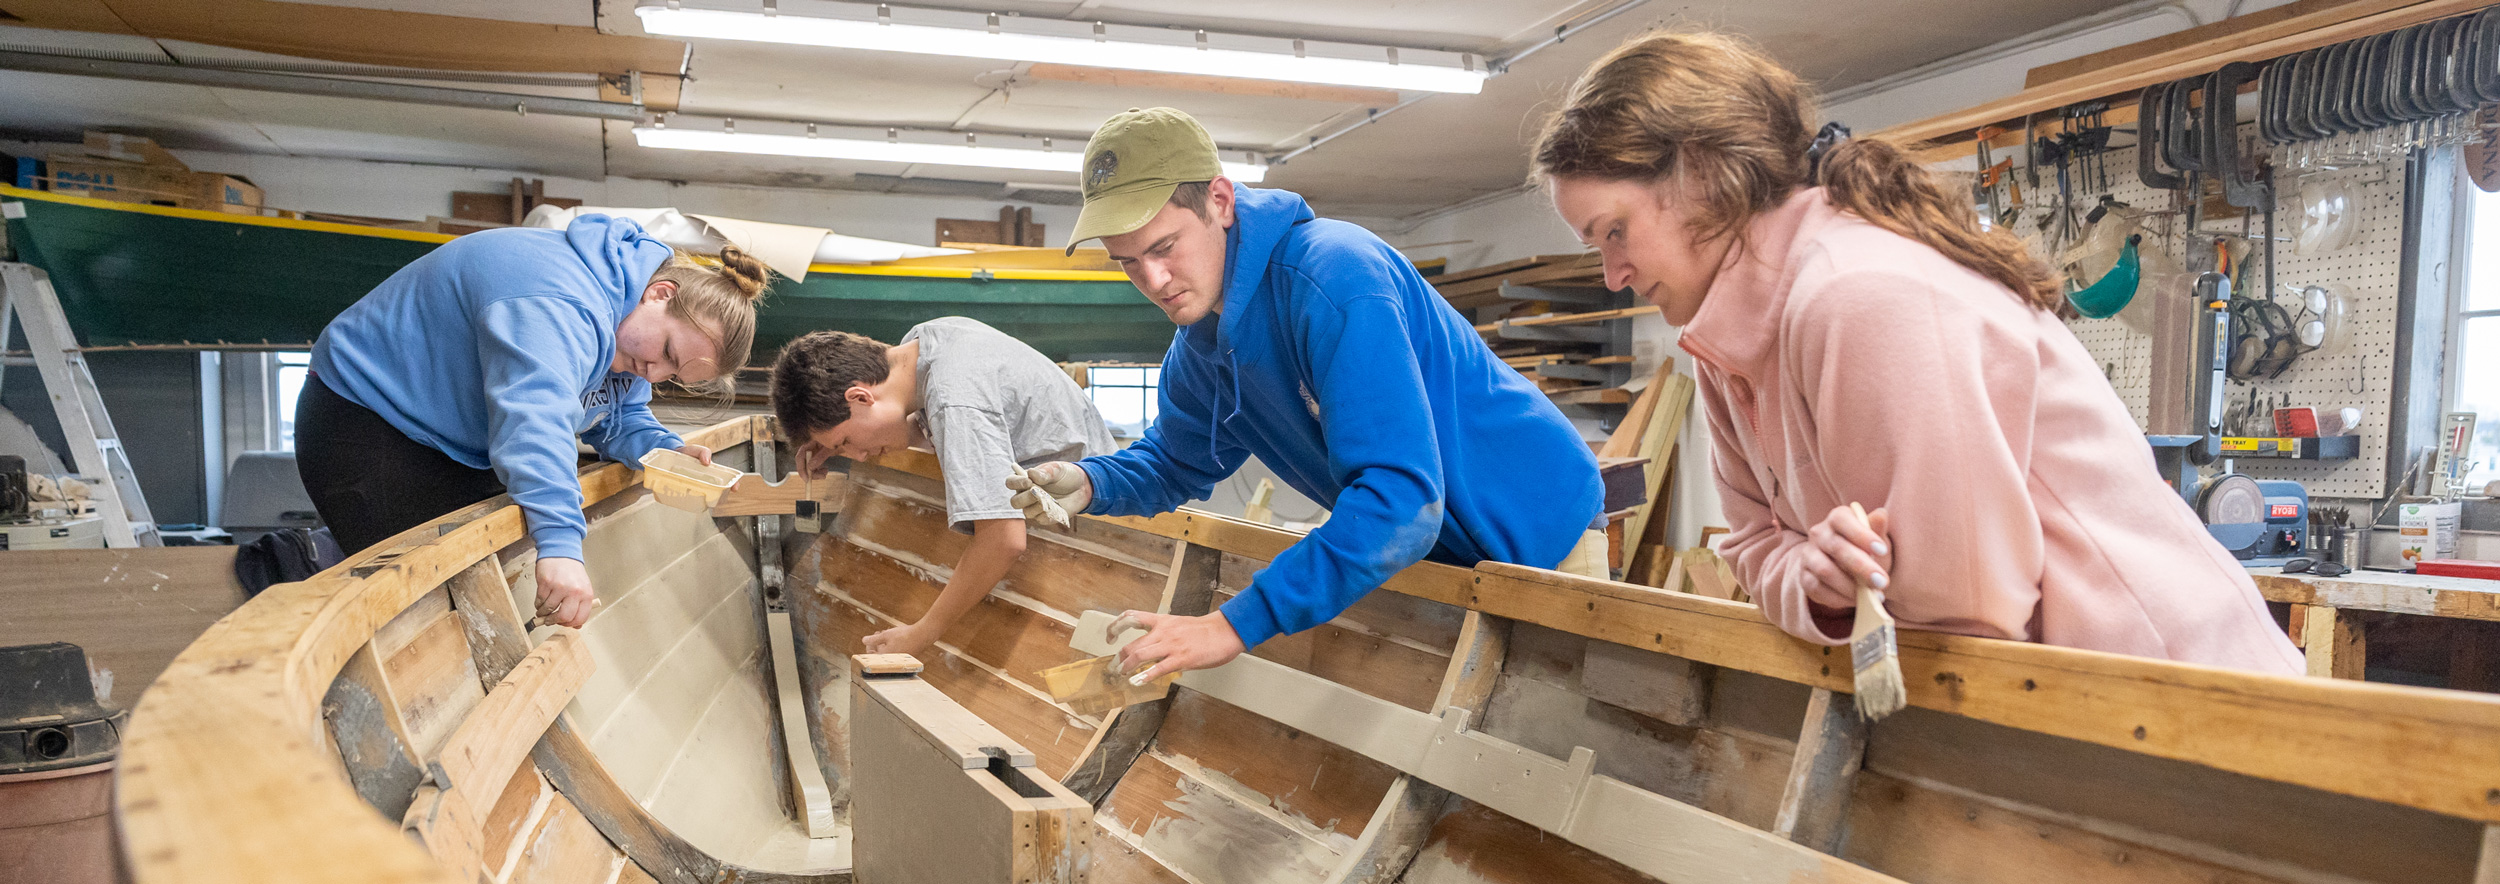 From left, UConn students Meghan Allmendingur, John Milczanowski and Aidan Davies – as well as Davies' sister, Sydney Davies – paint the interior of the boat Aidan is restoring for his capstone project in the John Gardner Boathouse at UConn Avery Point